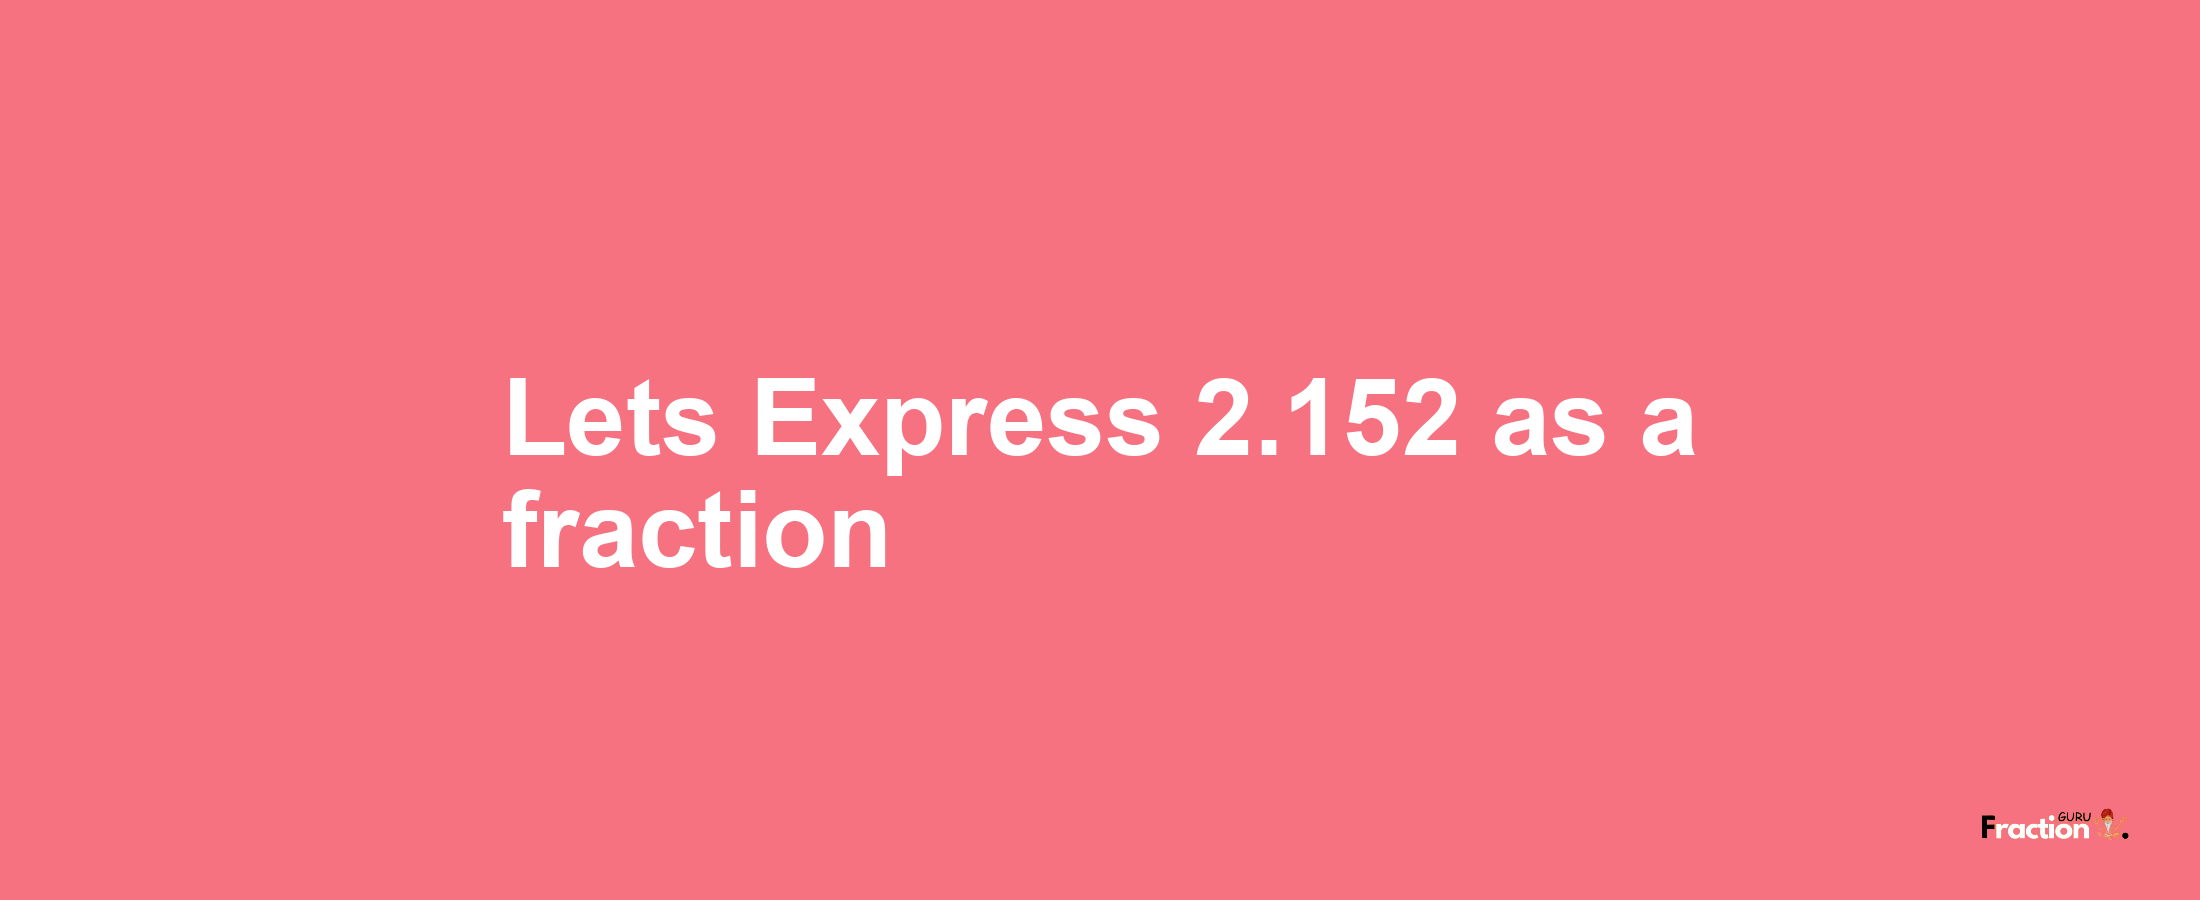 Lets Express 2.152 as afraction